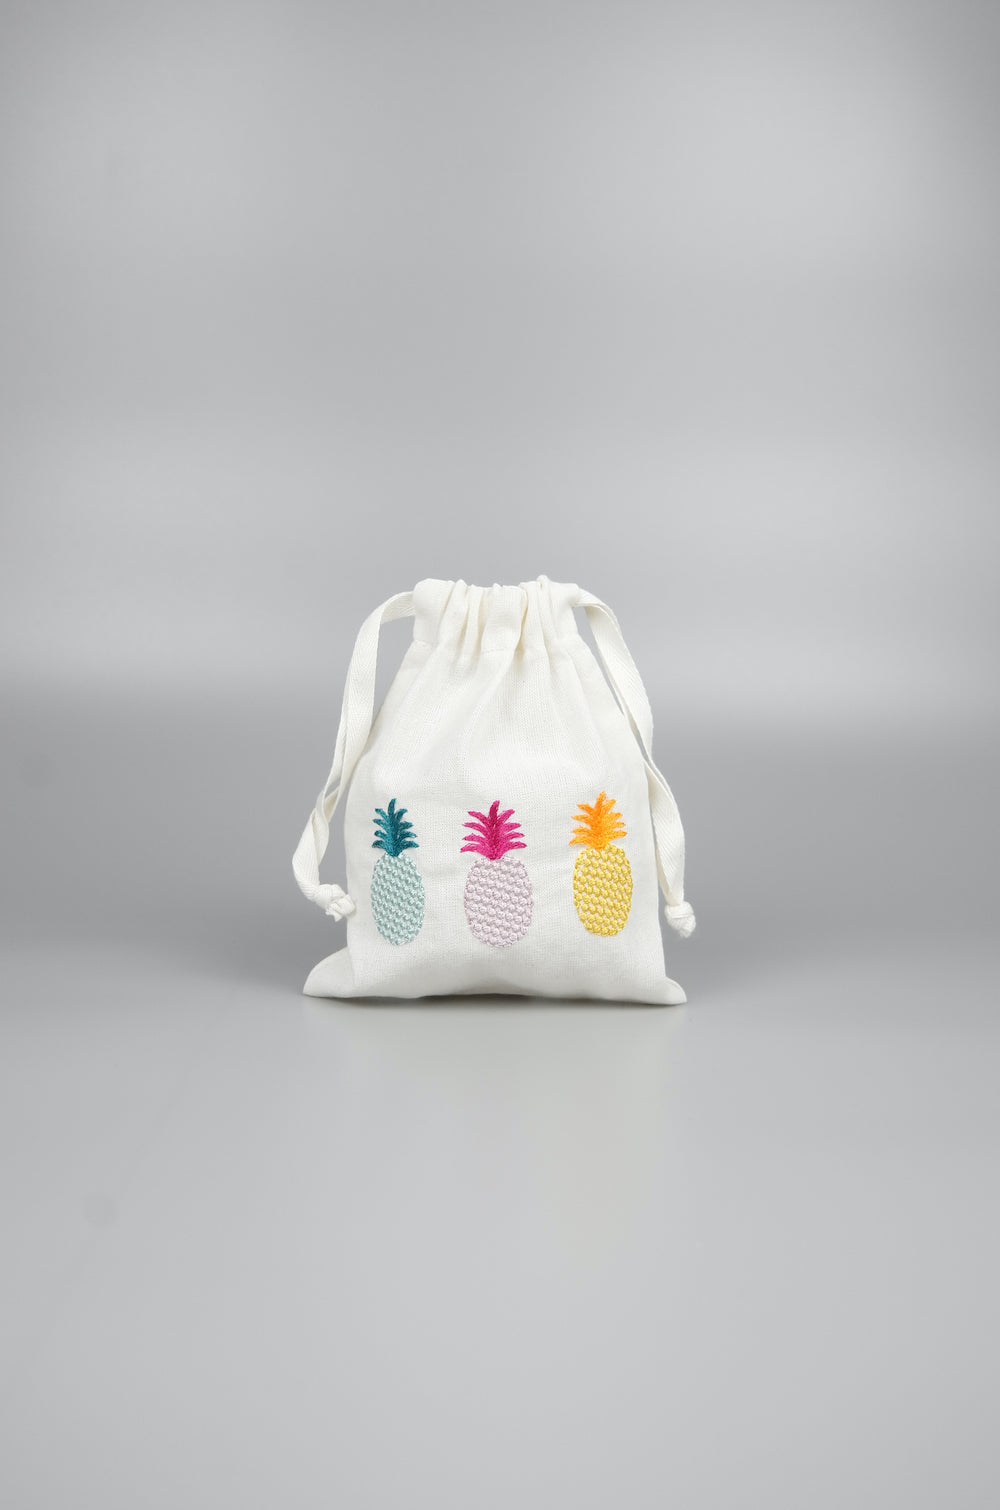 Summer Pineapples on Light Canvas Mini Drawstring Pouch